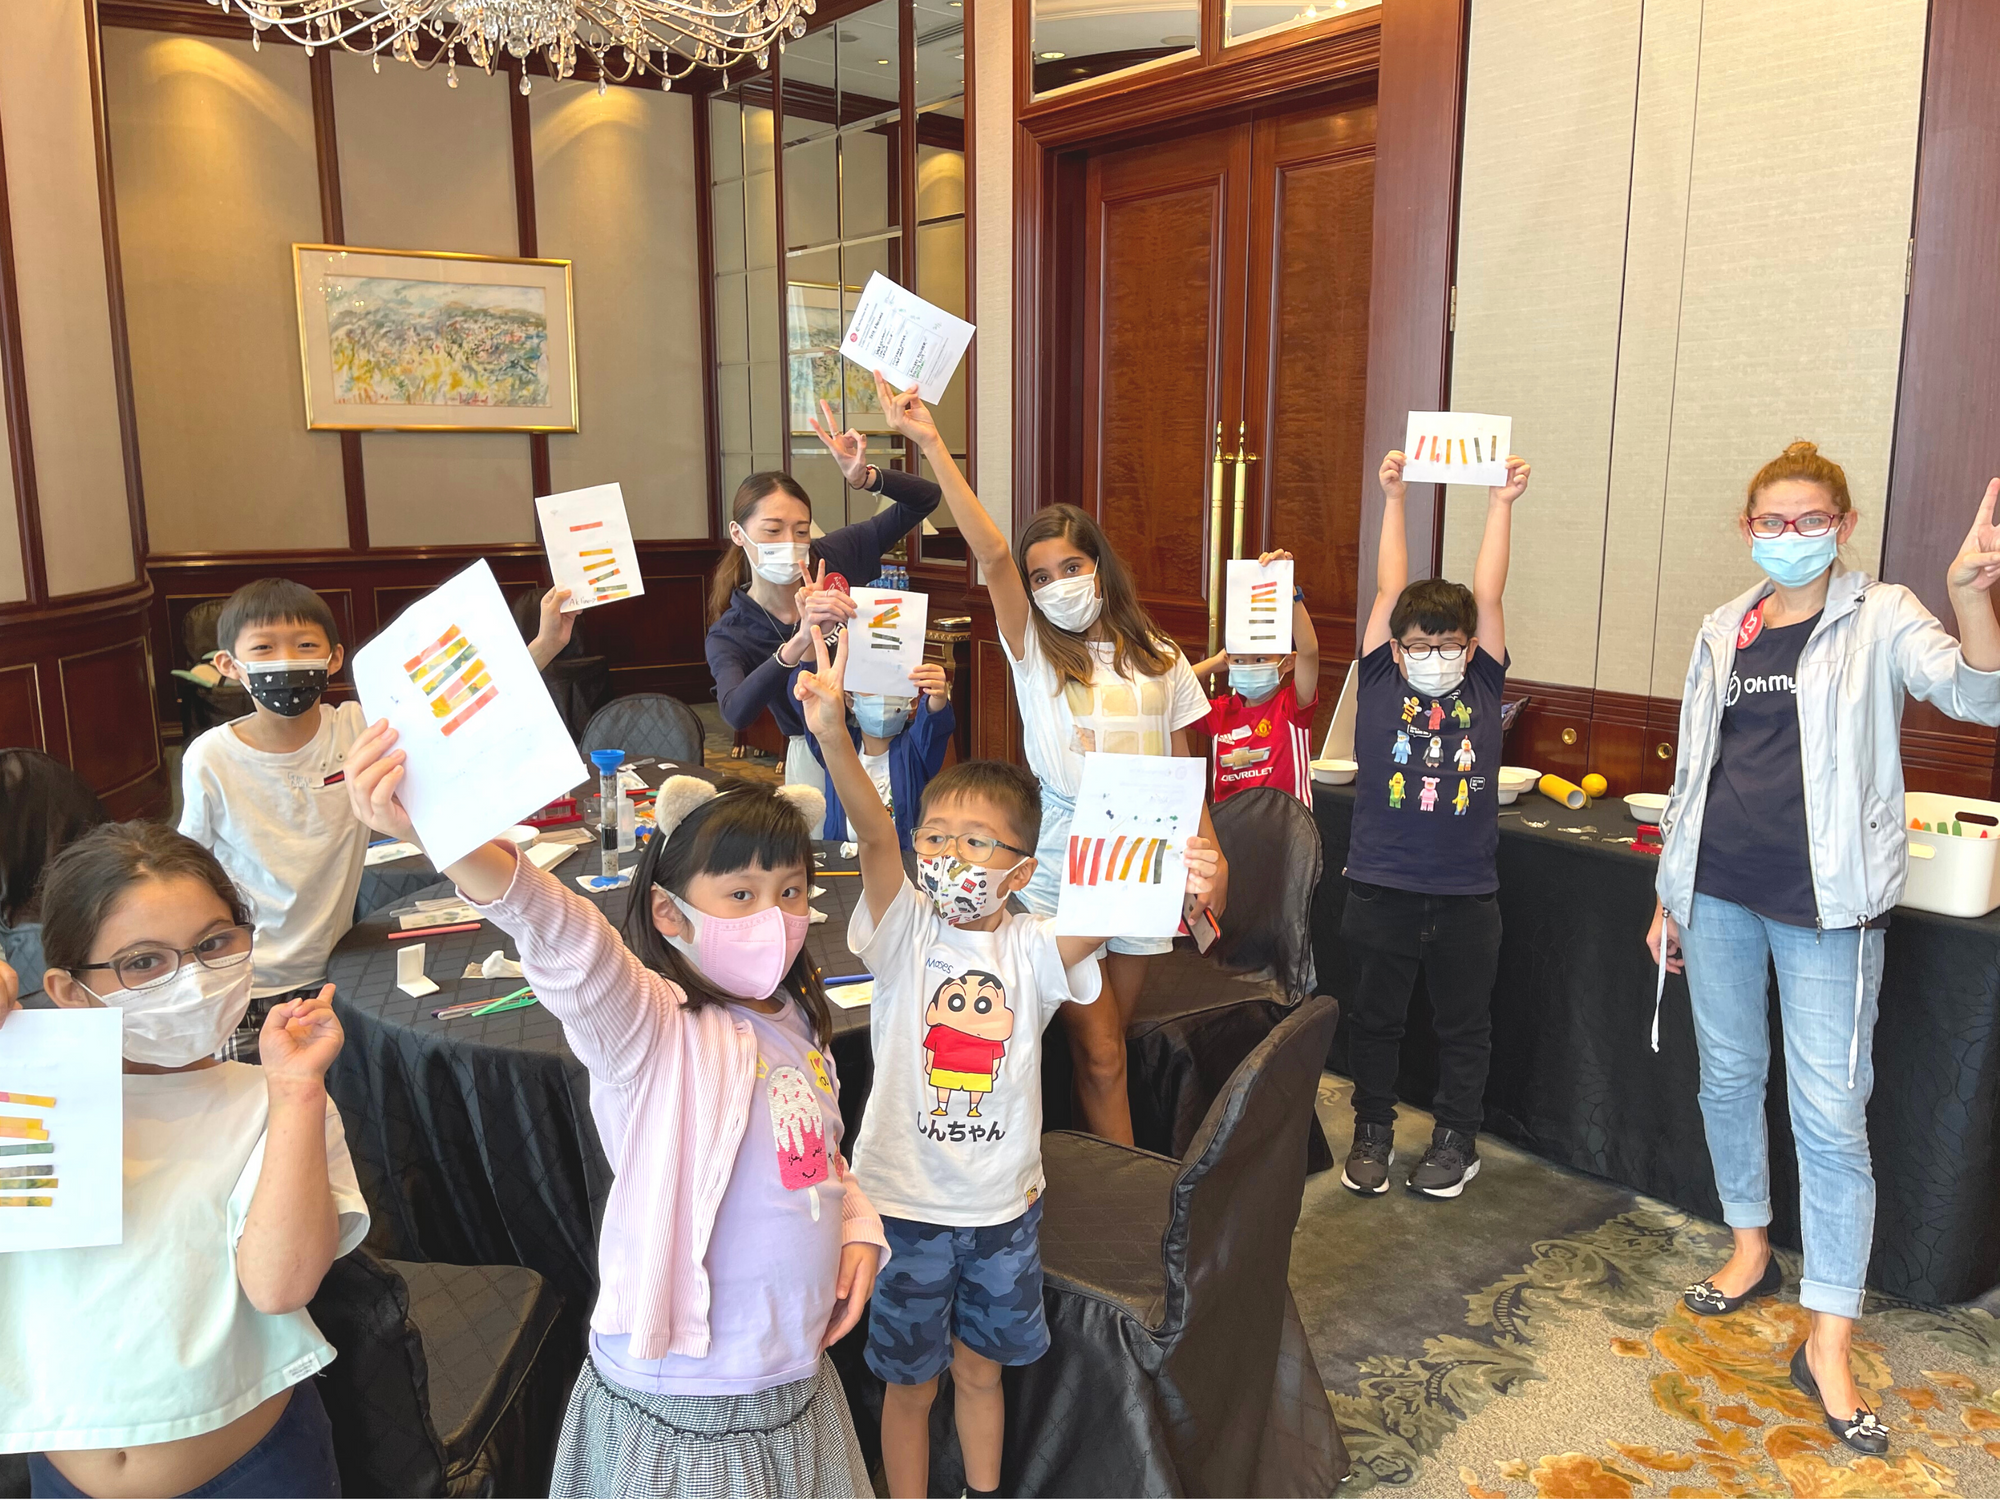 Mochy partners with Island Shangri-La: Fam-tabulous staycation with STEM summer camp, collaboration, hk hotel, best staycation, family, kid, children, play, fun, learn, education, relax